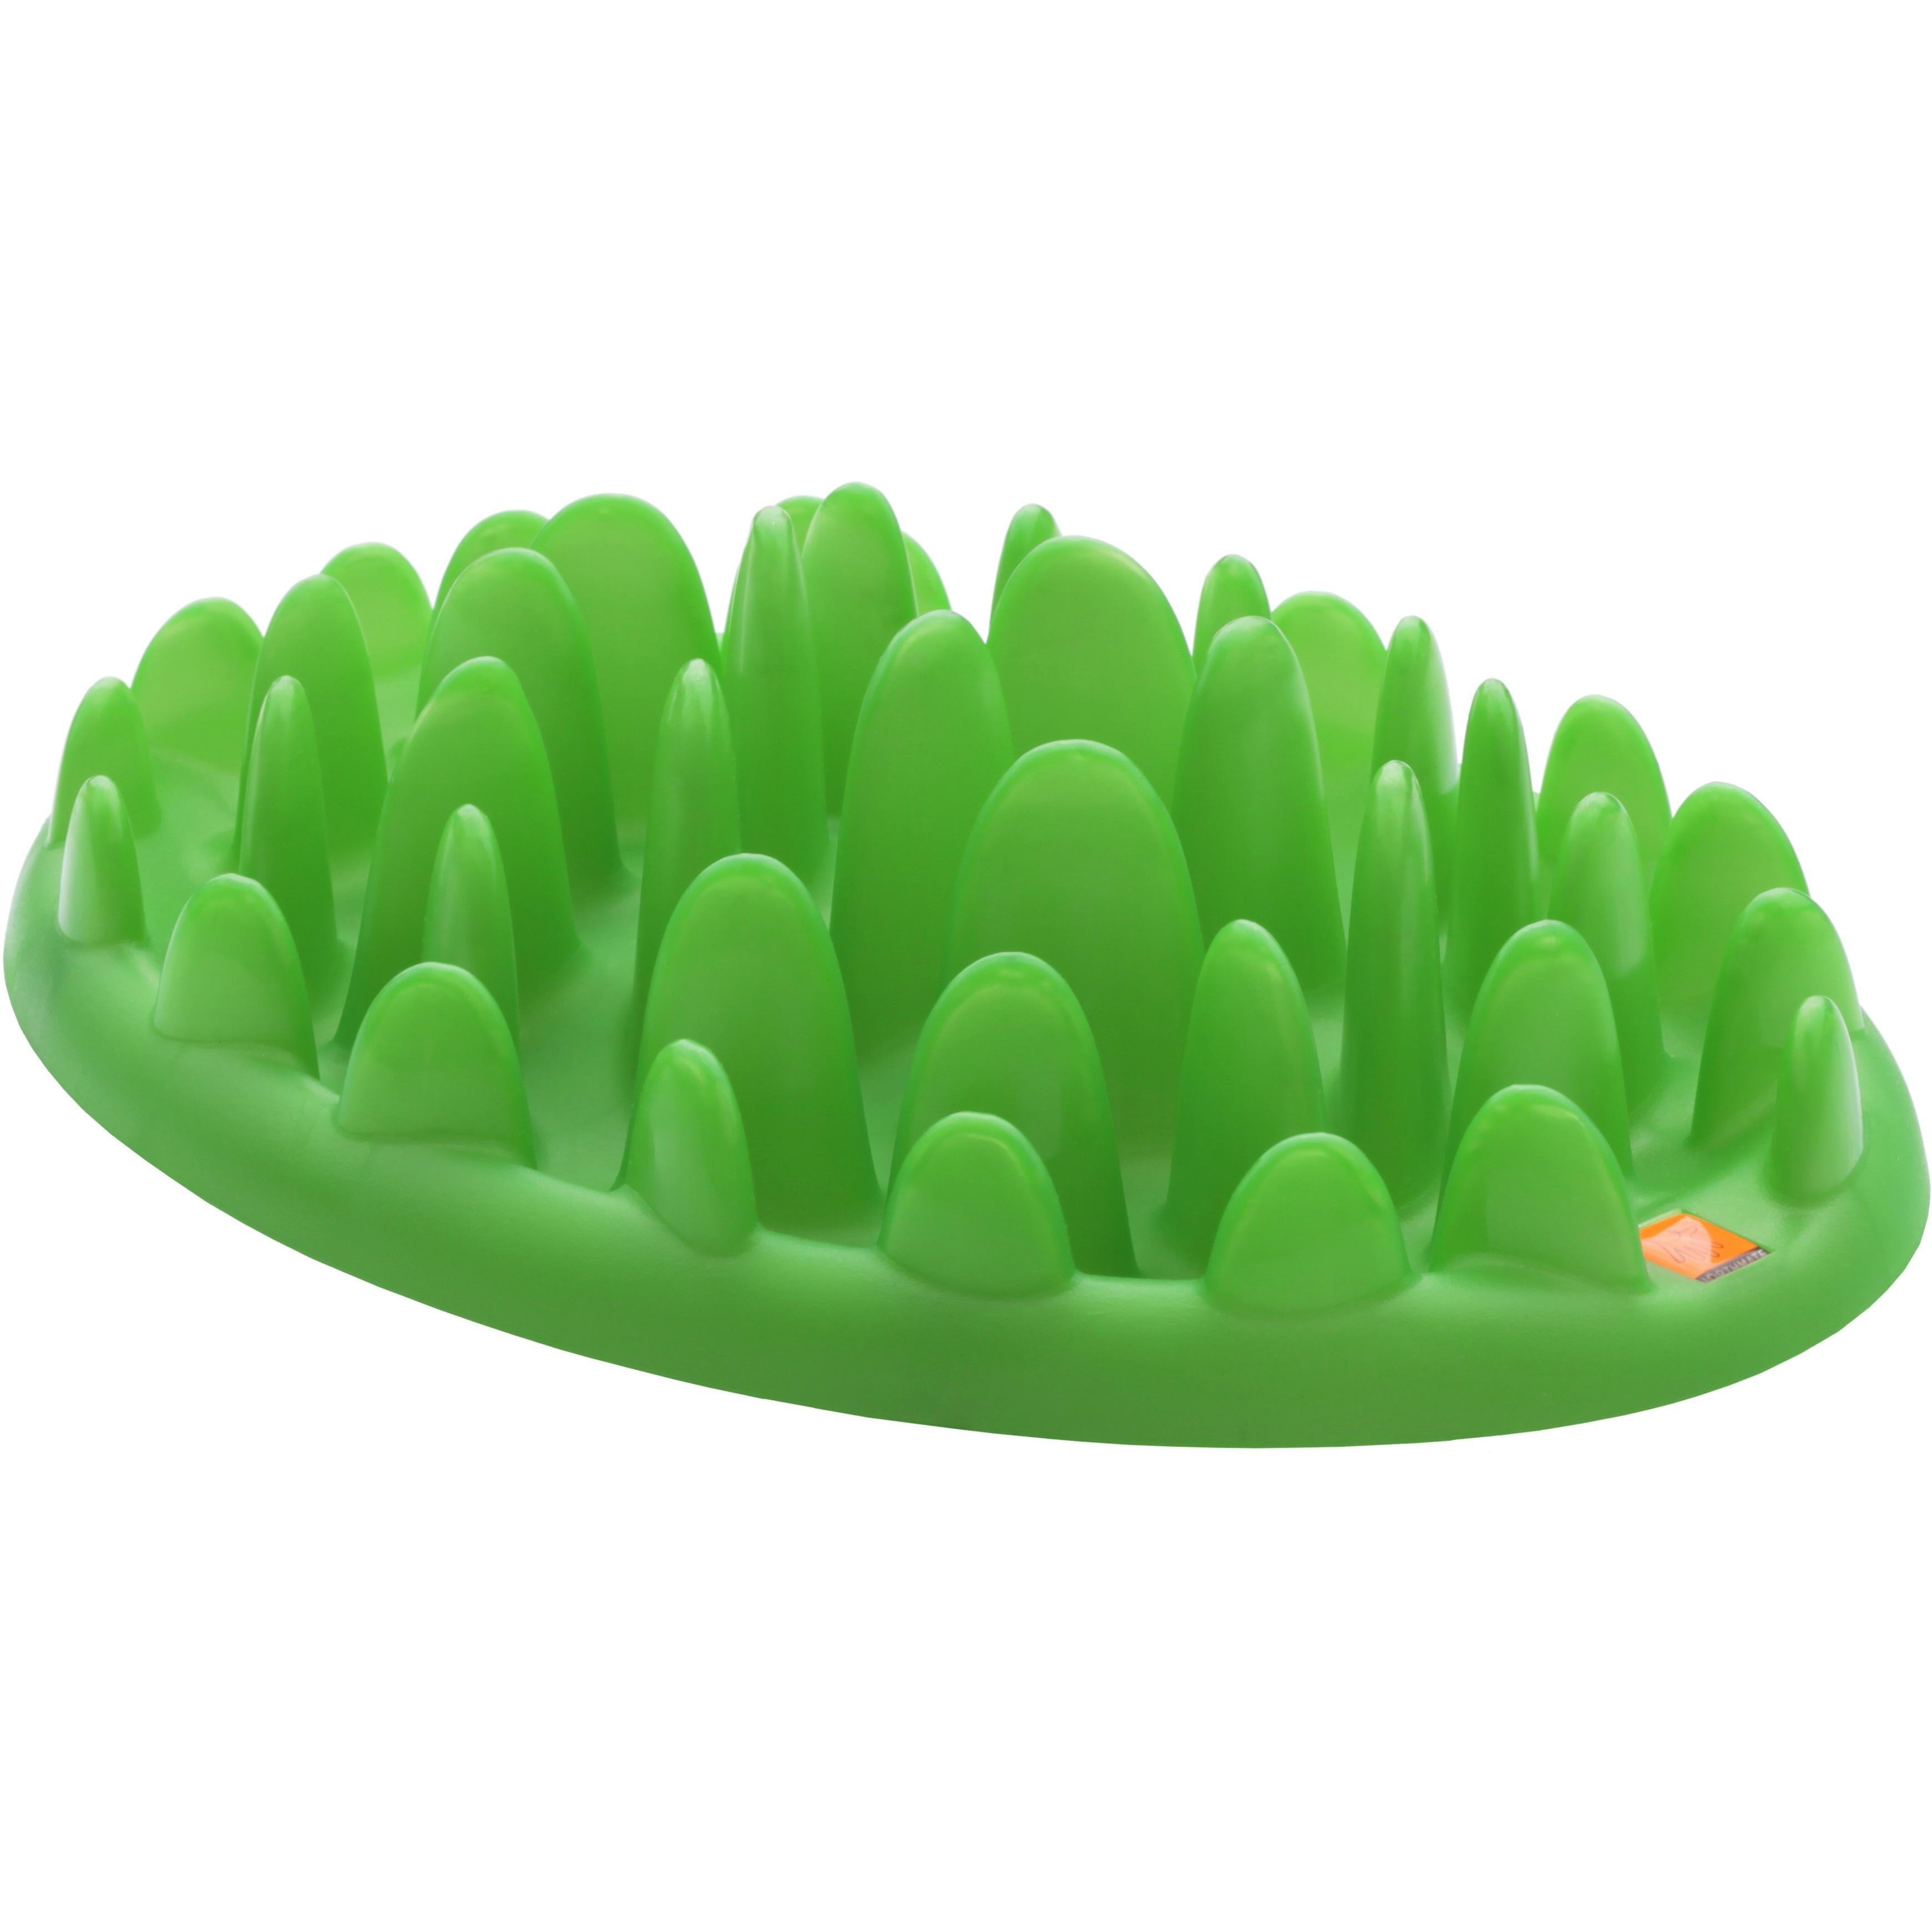 Northmate Green Interactive Slow Feeder for Dogs 16 Large Plastic NOB